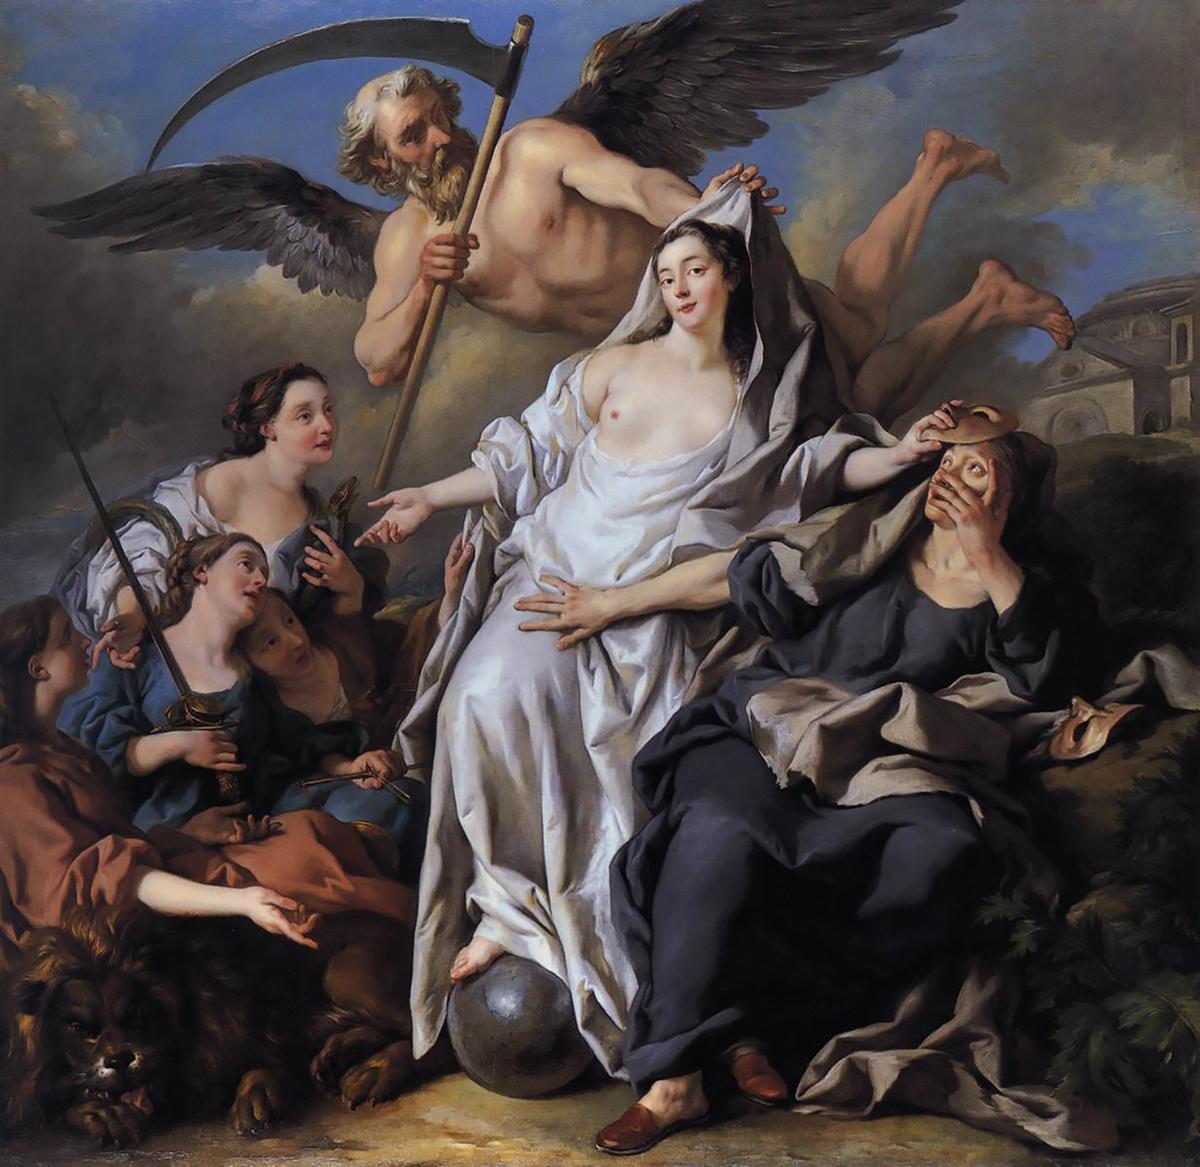 "An Allegory of Time Unveiling Truth," 1733, by Jean François de Troy. Oil on canvas. National Gallery, London. (Public Domain)